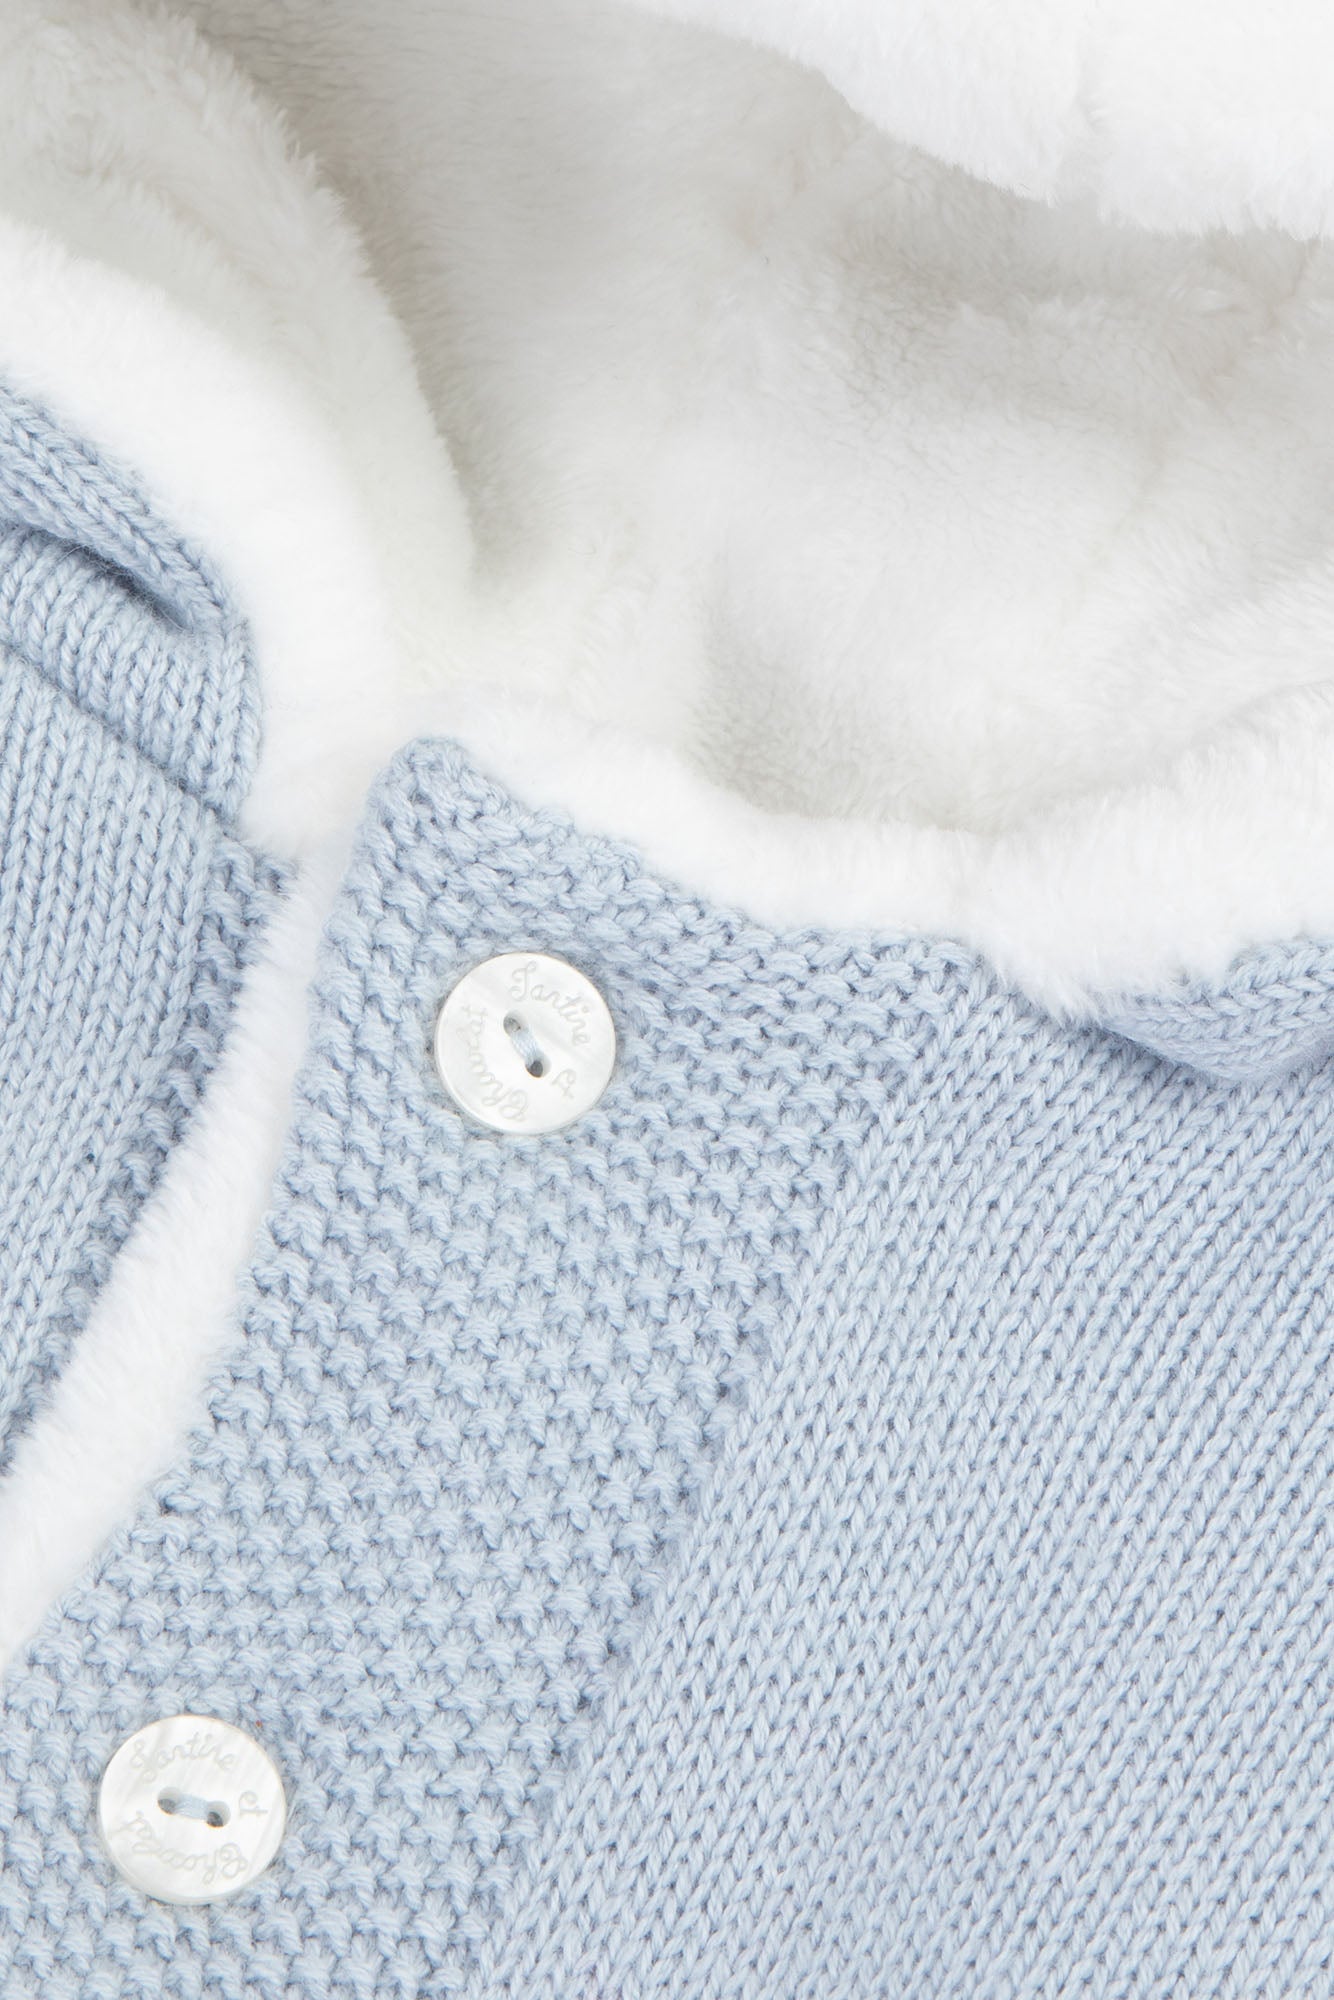 Tartine Baby Knit Hooded Sweater